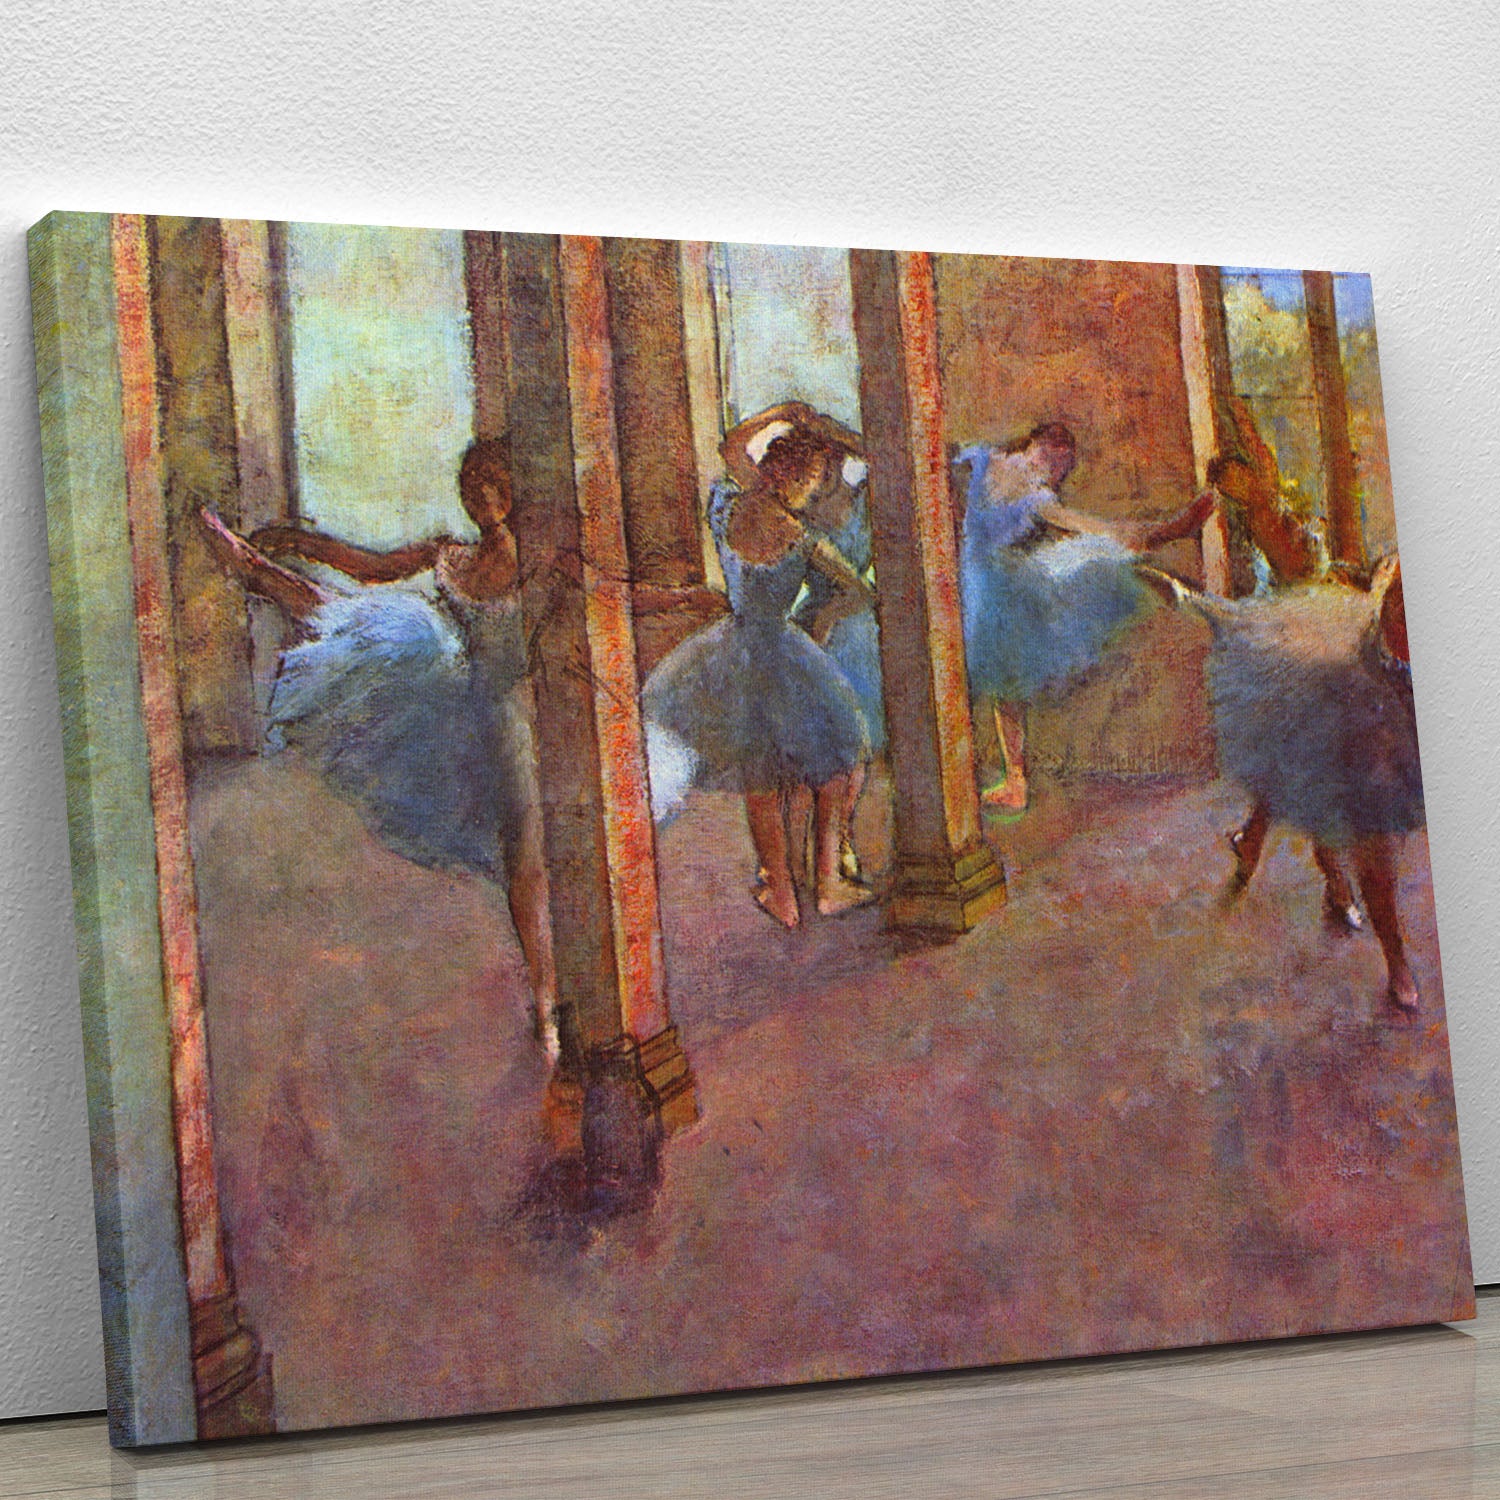 Dancers in the Foyer by Degas Canvas Print or Poster - Canvas Art Rocks - 1